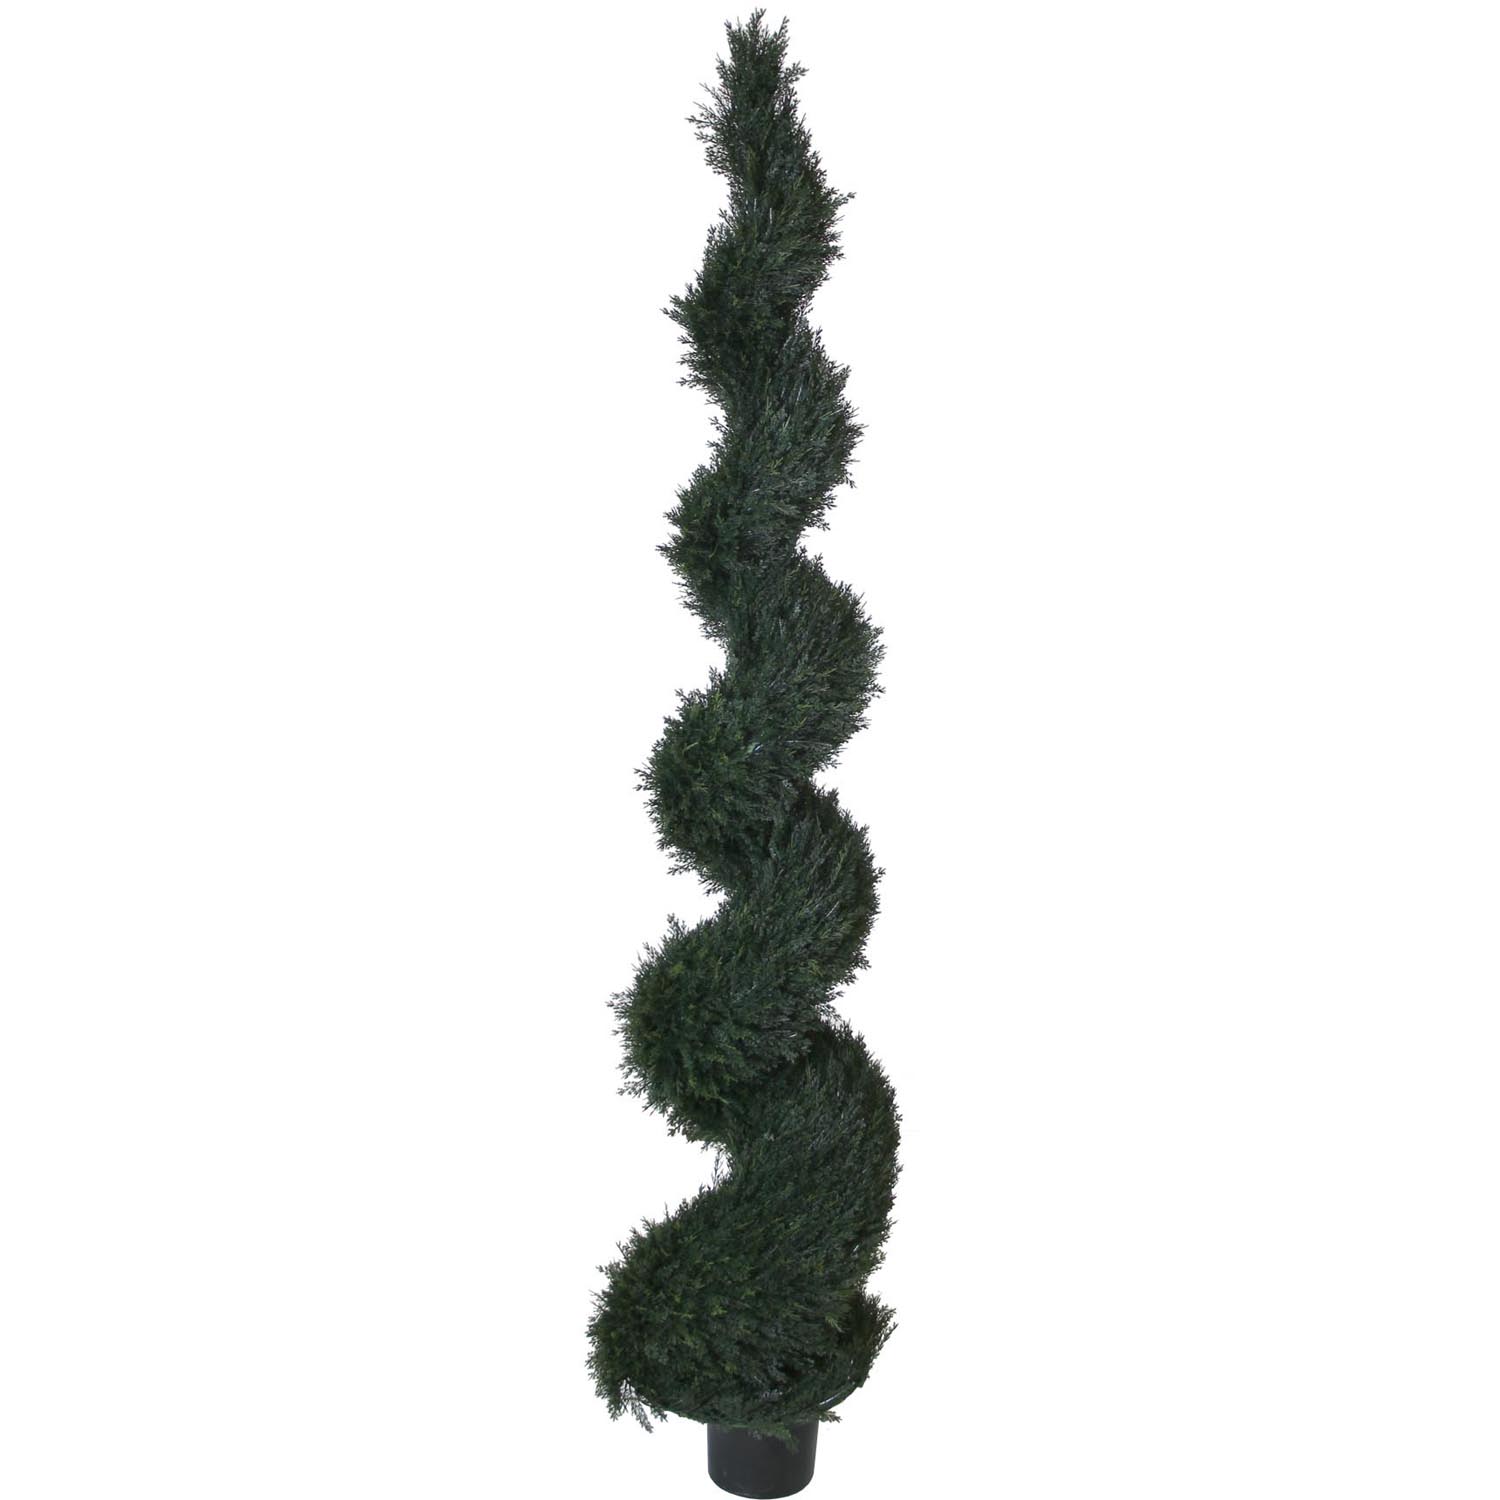 8 Foot Uv Protected Spiral Pond Cypress Topiary: Potted